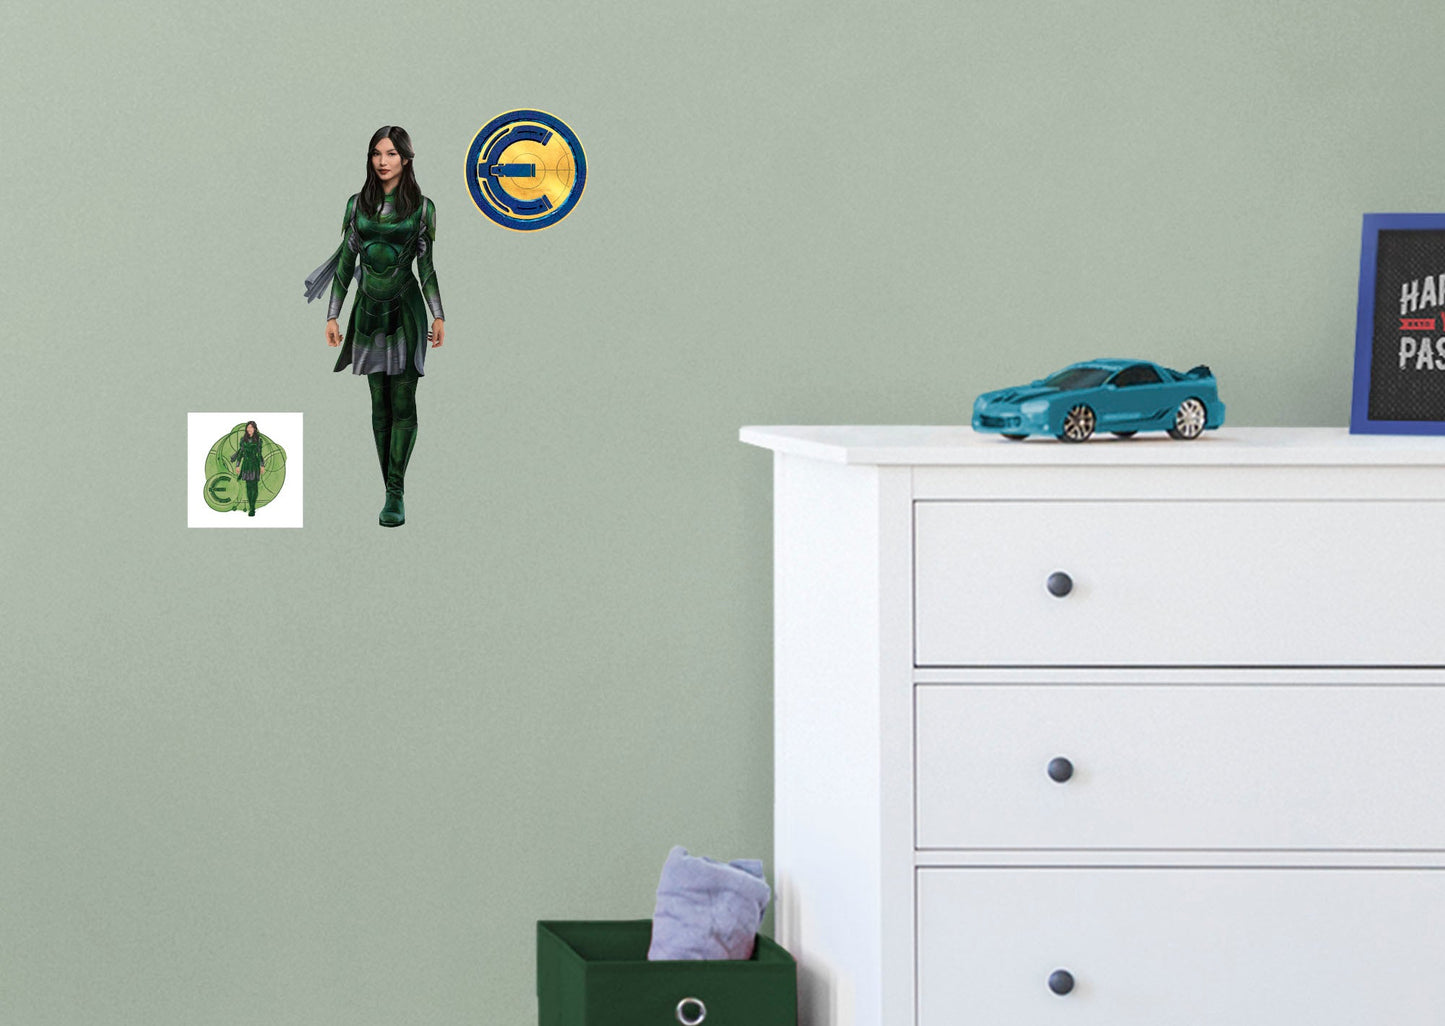 Eternals: Sersi RealBig        - Officially Licensed Marvel Removable Wall   Adhesive Decal